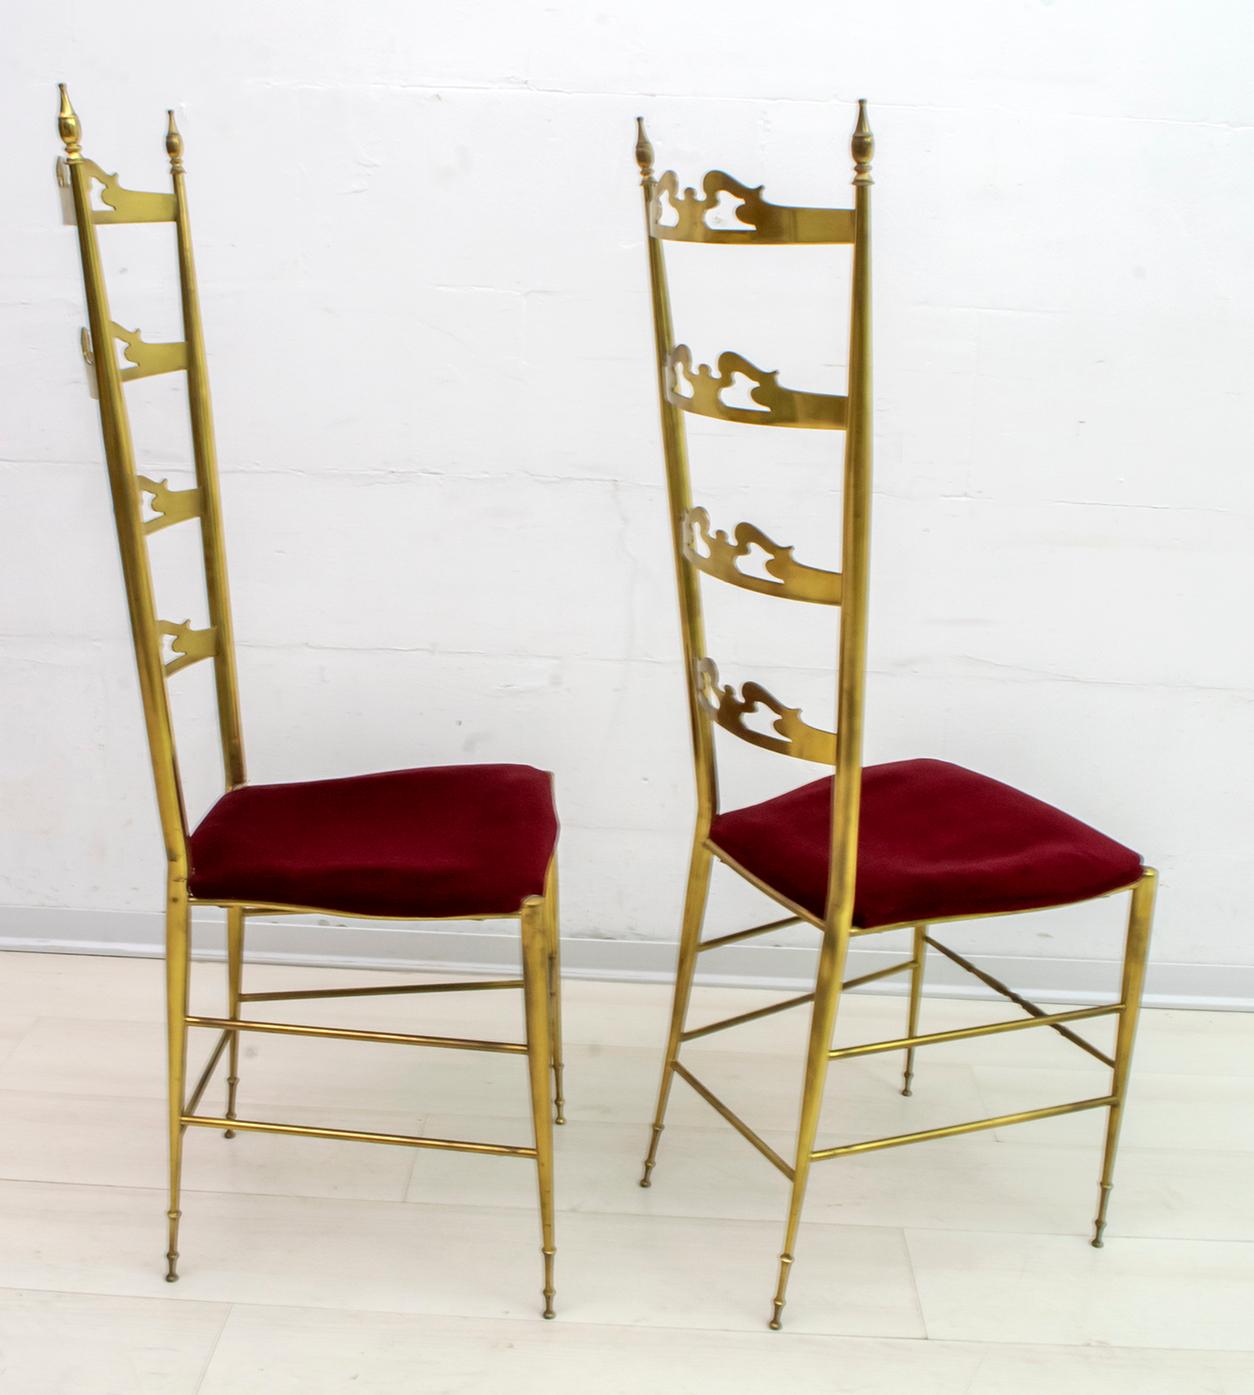 Pair of Mid-Century Modern Italian Brass High Back Chiavari Chairs, 1950s In Good Condition For Sale In Puglia, Puglia